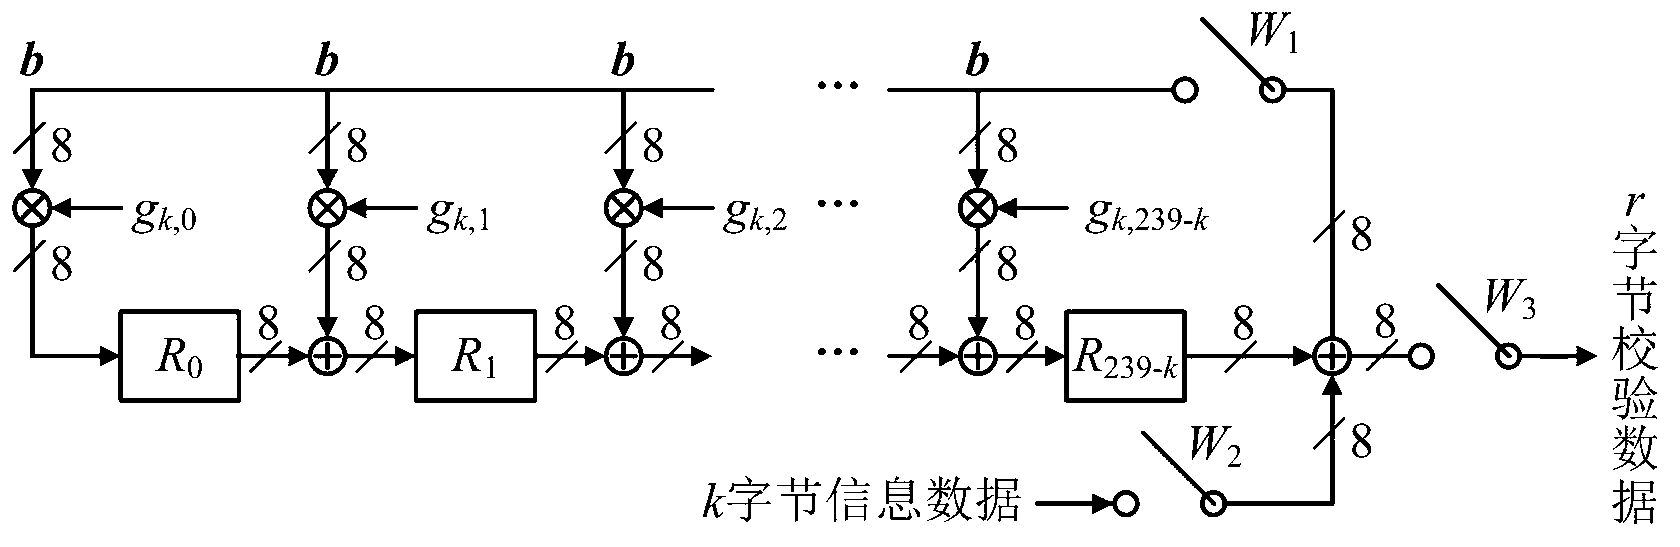 Parallel encoder of multi-code rate reed-solomon (RS) codes in china mobile multimedia broadcasting (CMMB) and encoding method